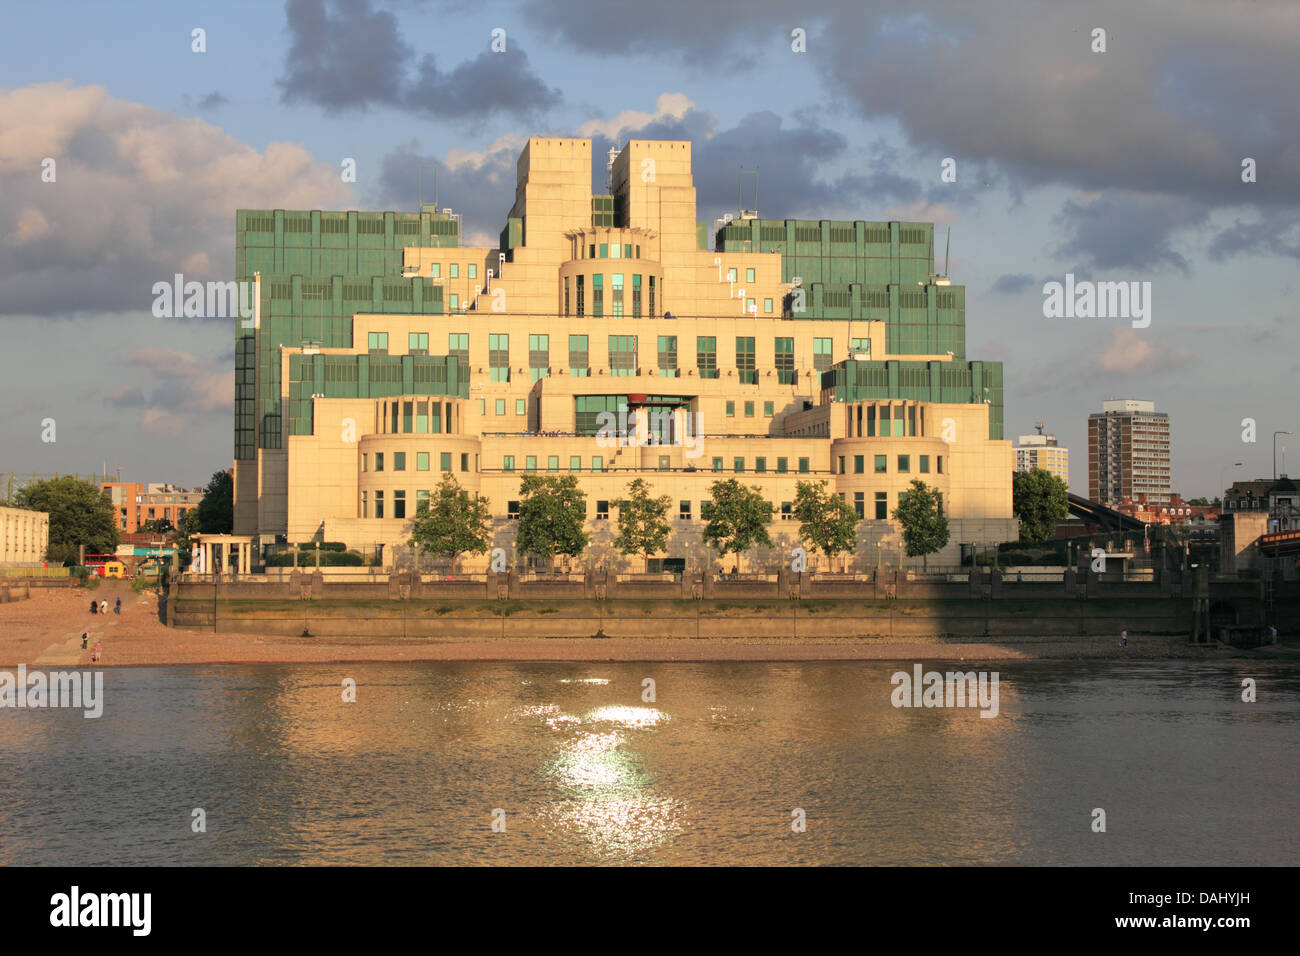 The SIS Building, known as the MI6 HQ Building at 85 Albert Embankment, Vauxhall Cross, London UK Stock Photo